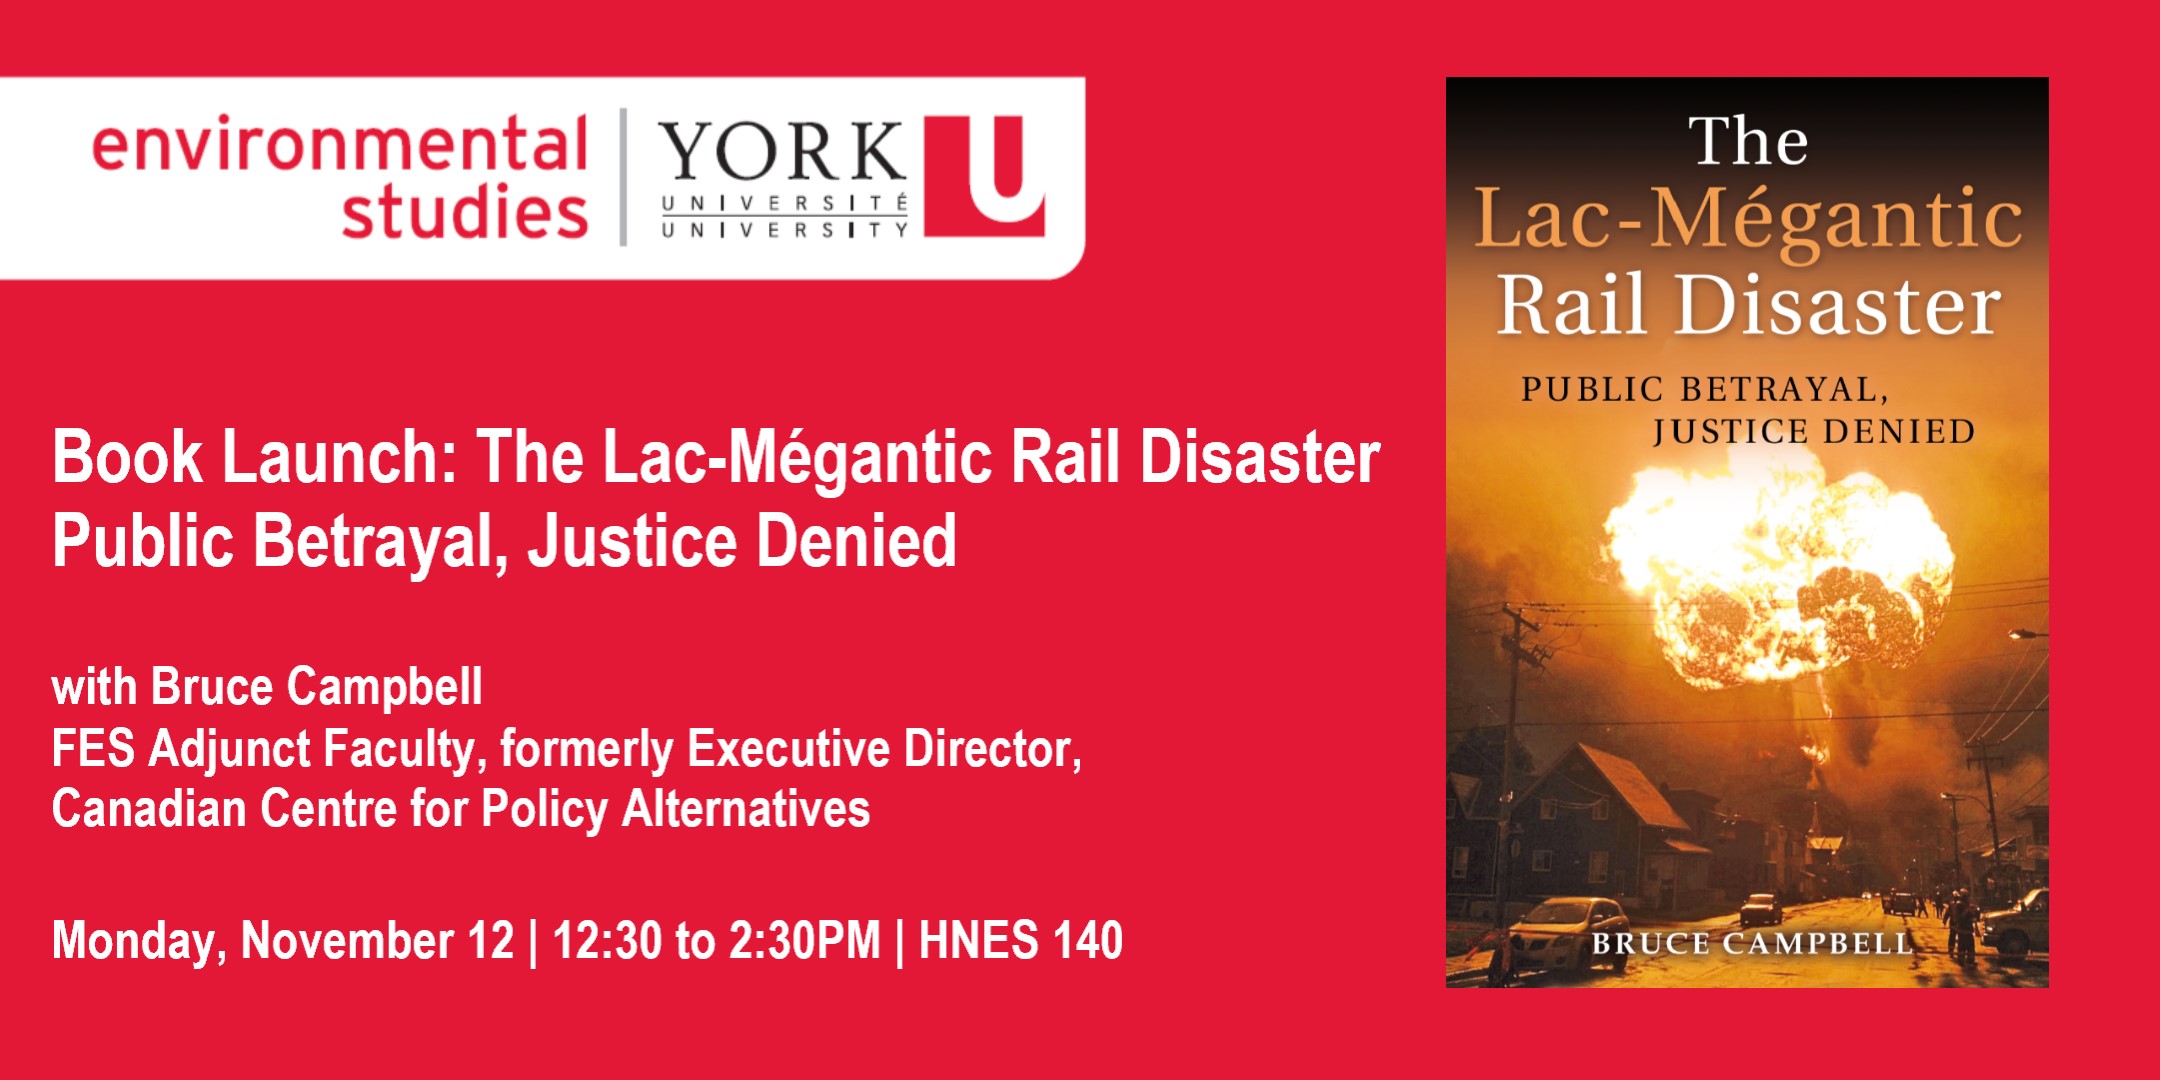 Book Launch: The Lac-Mégantic Rail Disaster, Public Betrayal, Justice Denied - November 12th, 12:30-2:30pm